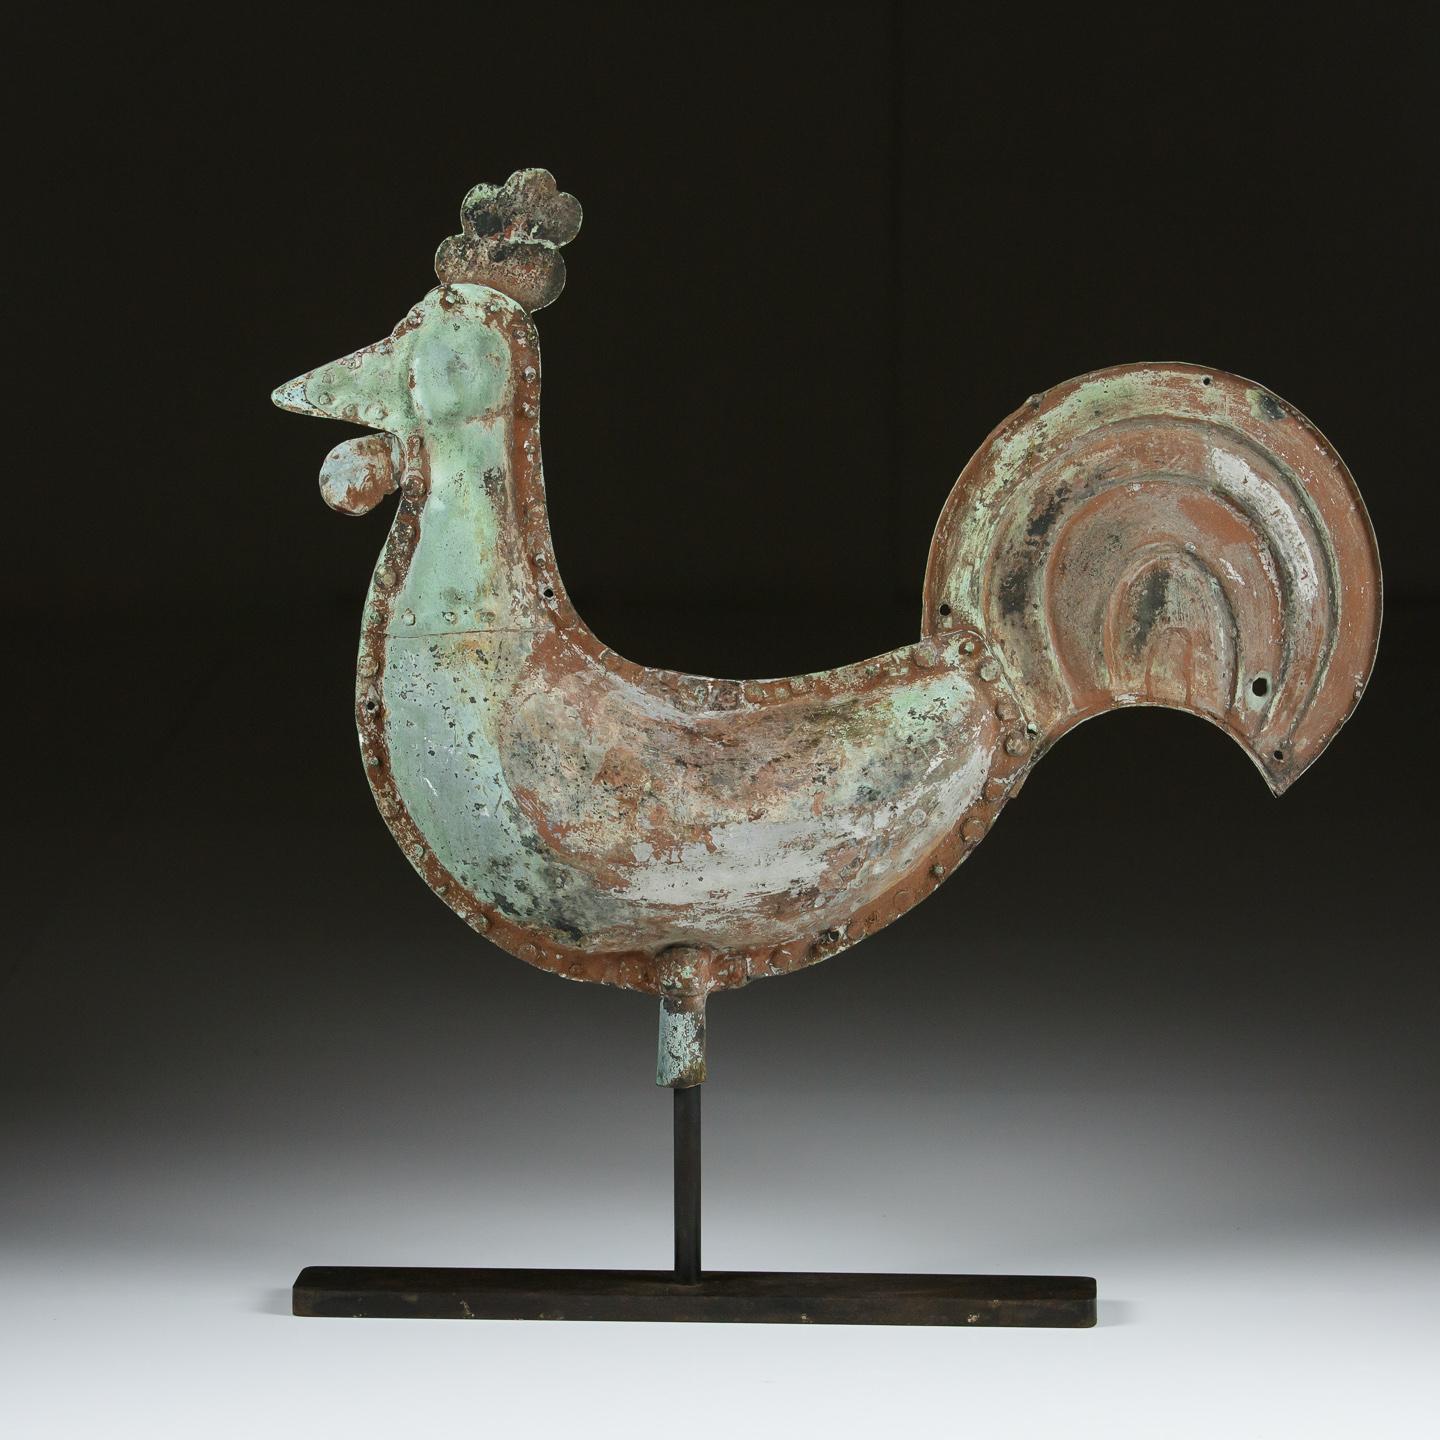 Large 19th Century Full Bodied Cockerel Weathervane In Original Verdigris Finish In Distressed Condition In Pease pottage, West Sussex